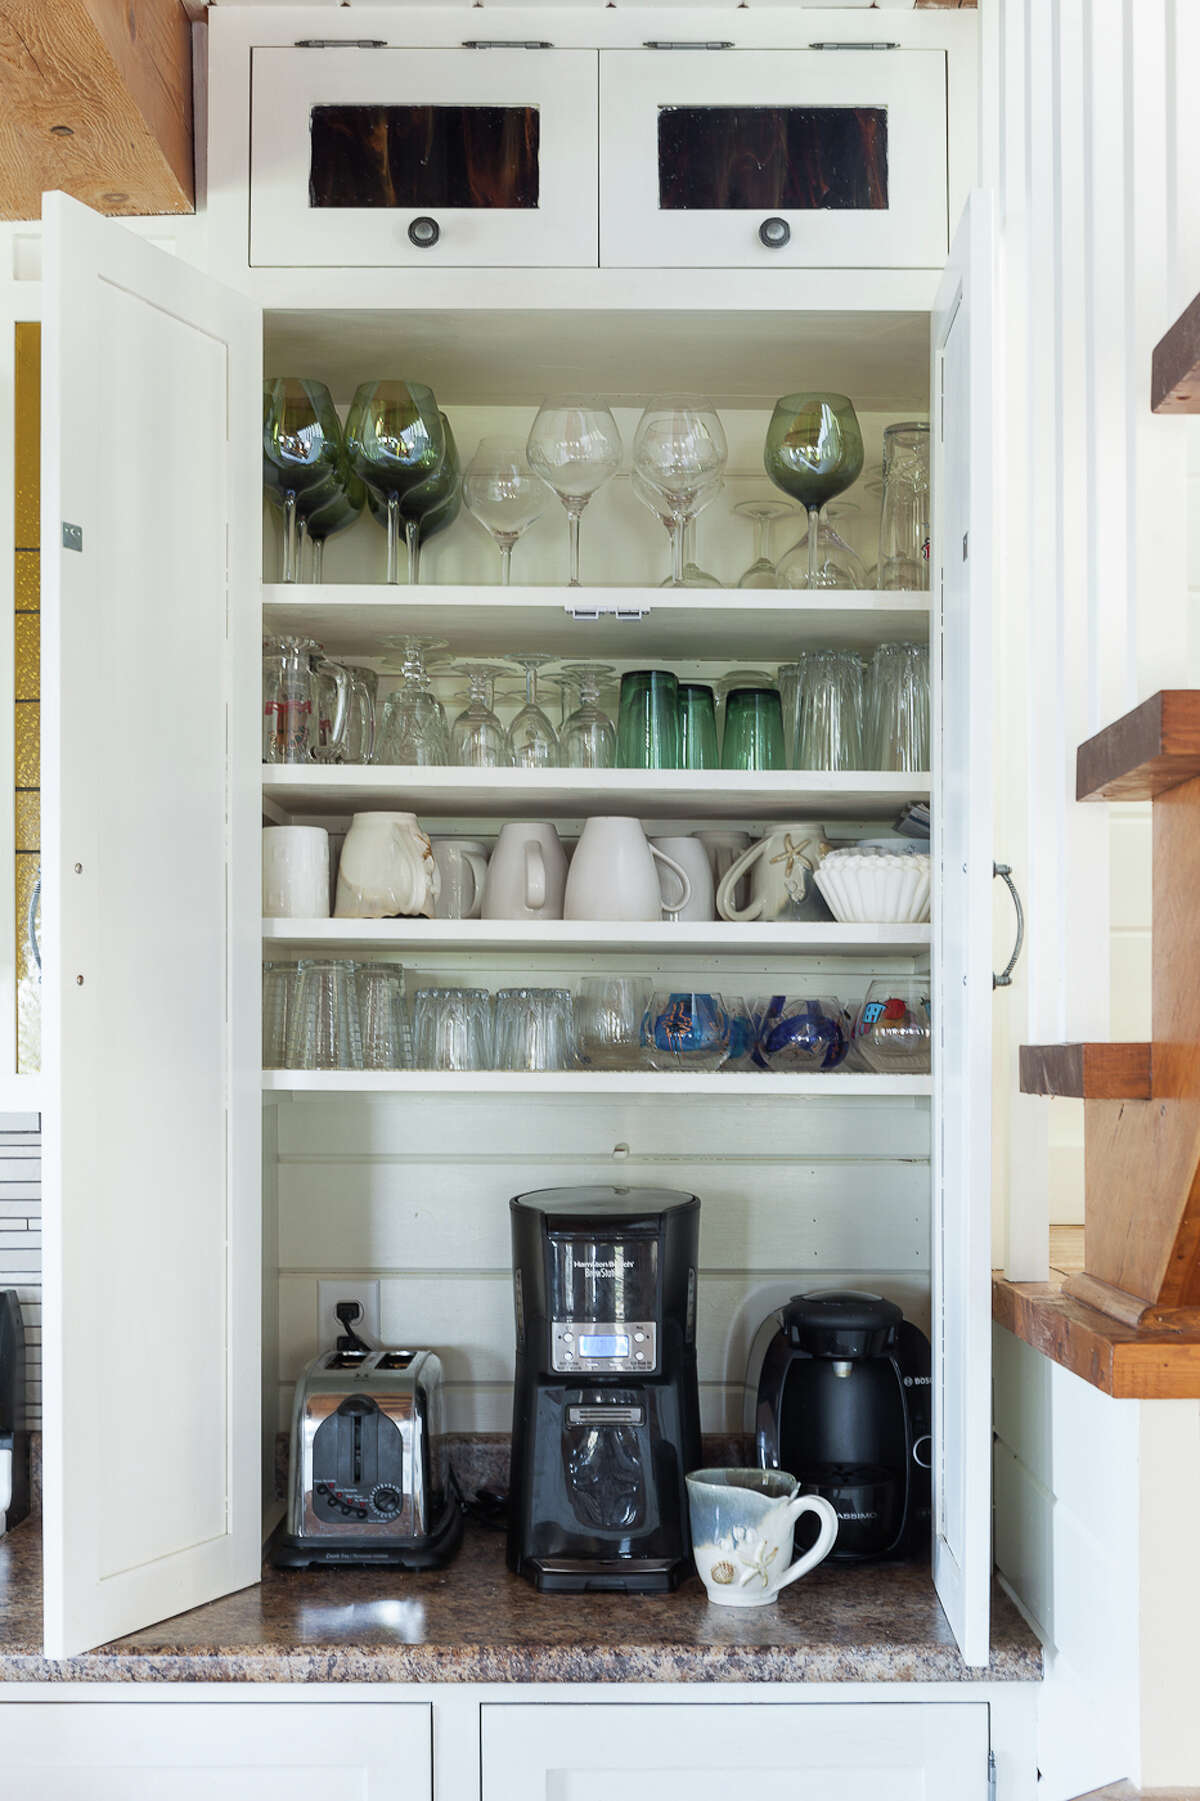 Small appliances drawers, cabinets and garages are extremely popular, says Nino Sitchinava, principal economist for the home website Houzz.